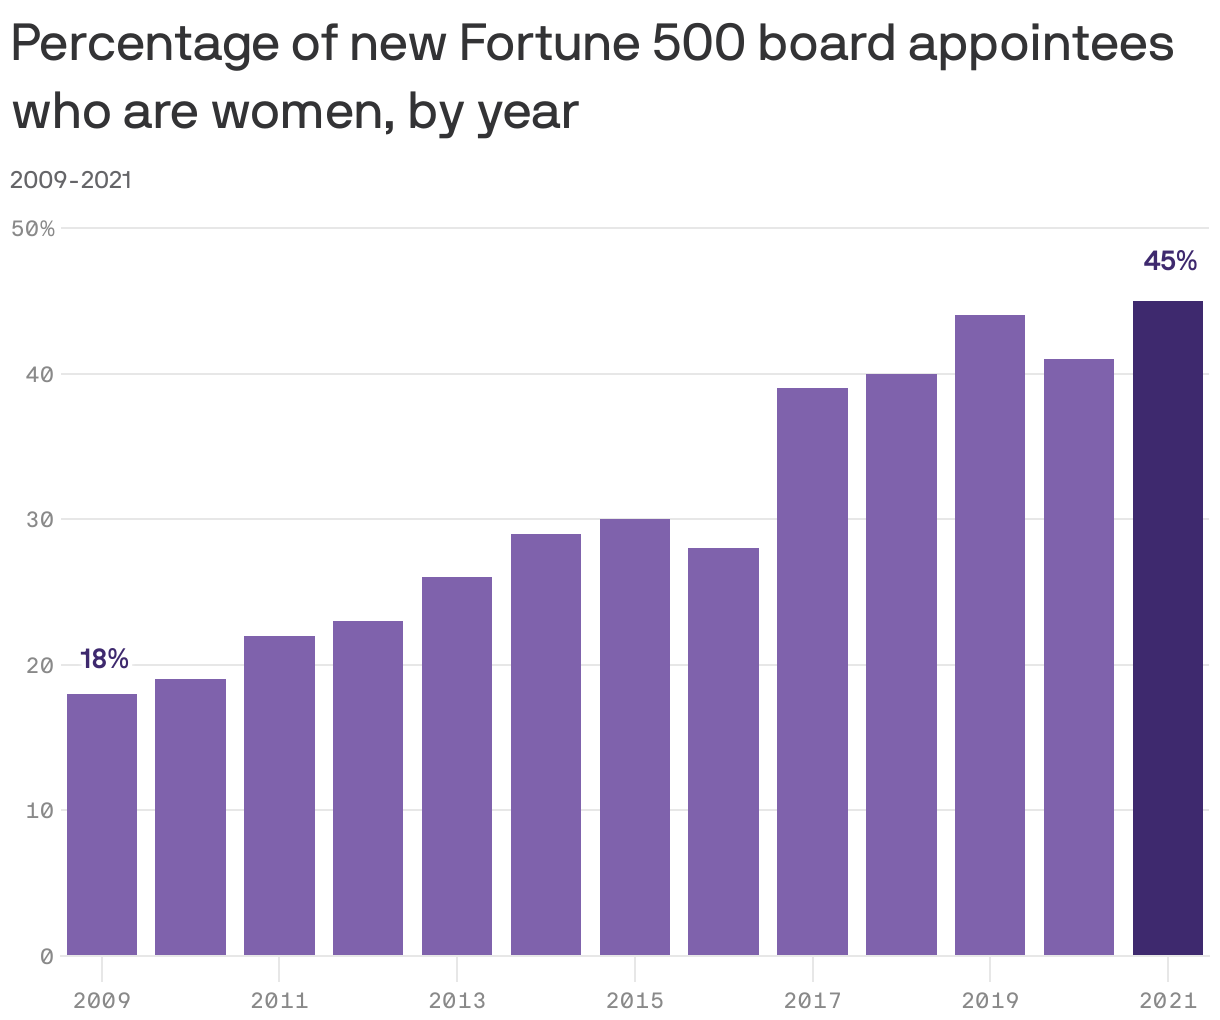 Percentage of new Fortune 500 board appointees who are women, by year